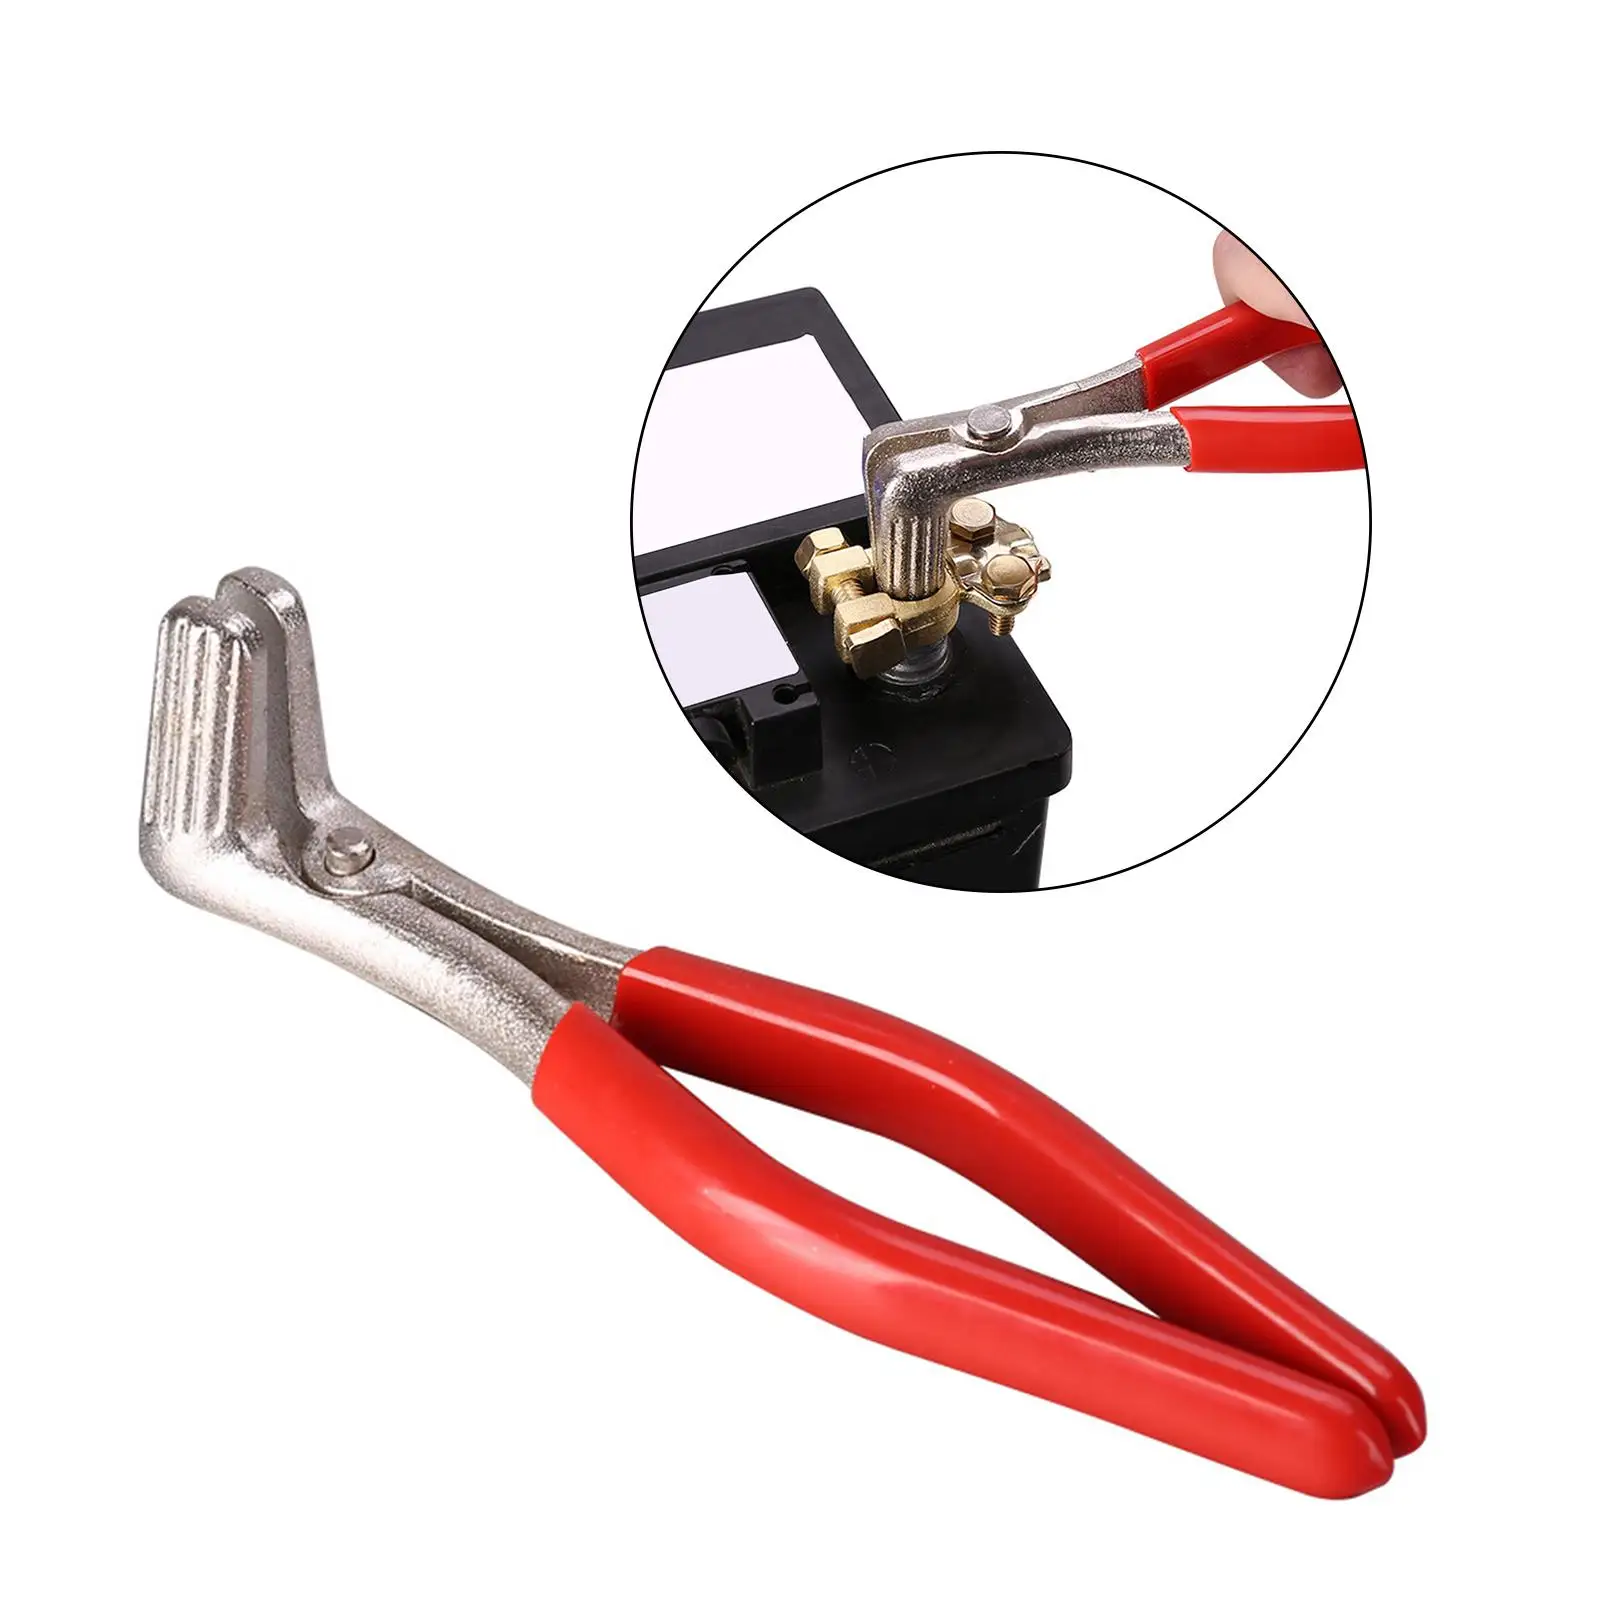 Auto Battery Pliers Multipurpose Automotive Repair Tool Battery Terminal Spreader for Truck Boat UTV Attachments